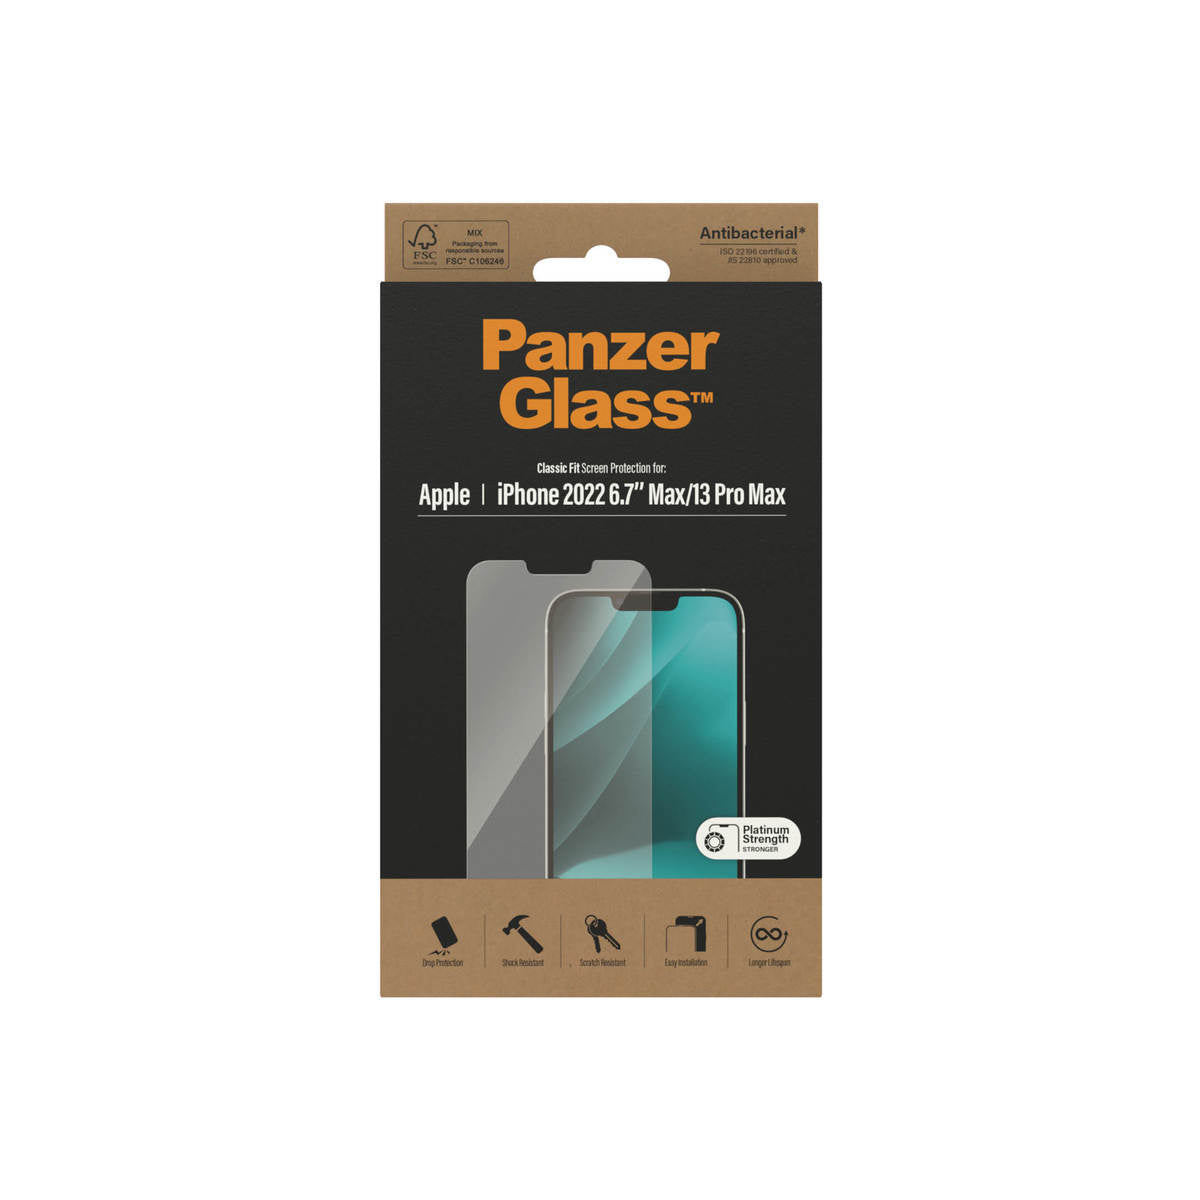 PanzerGlass Classic Fit Antibacterial Screen Protector for iPhone 14 Plus.